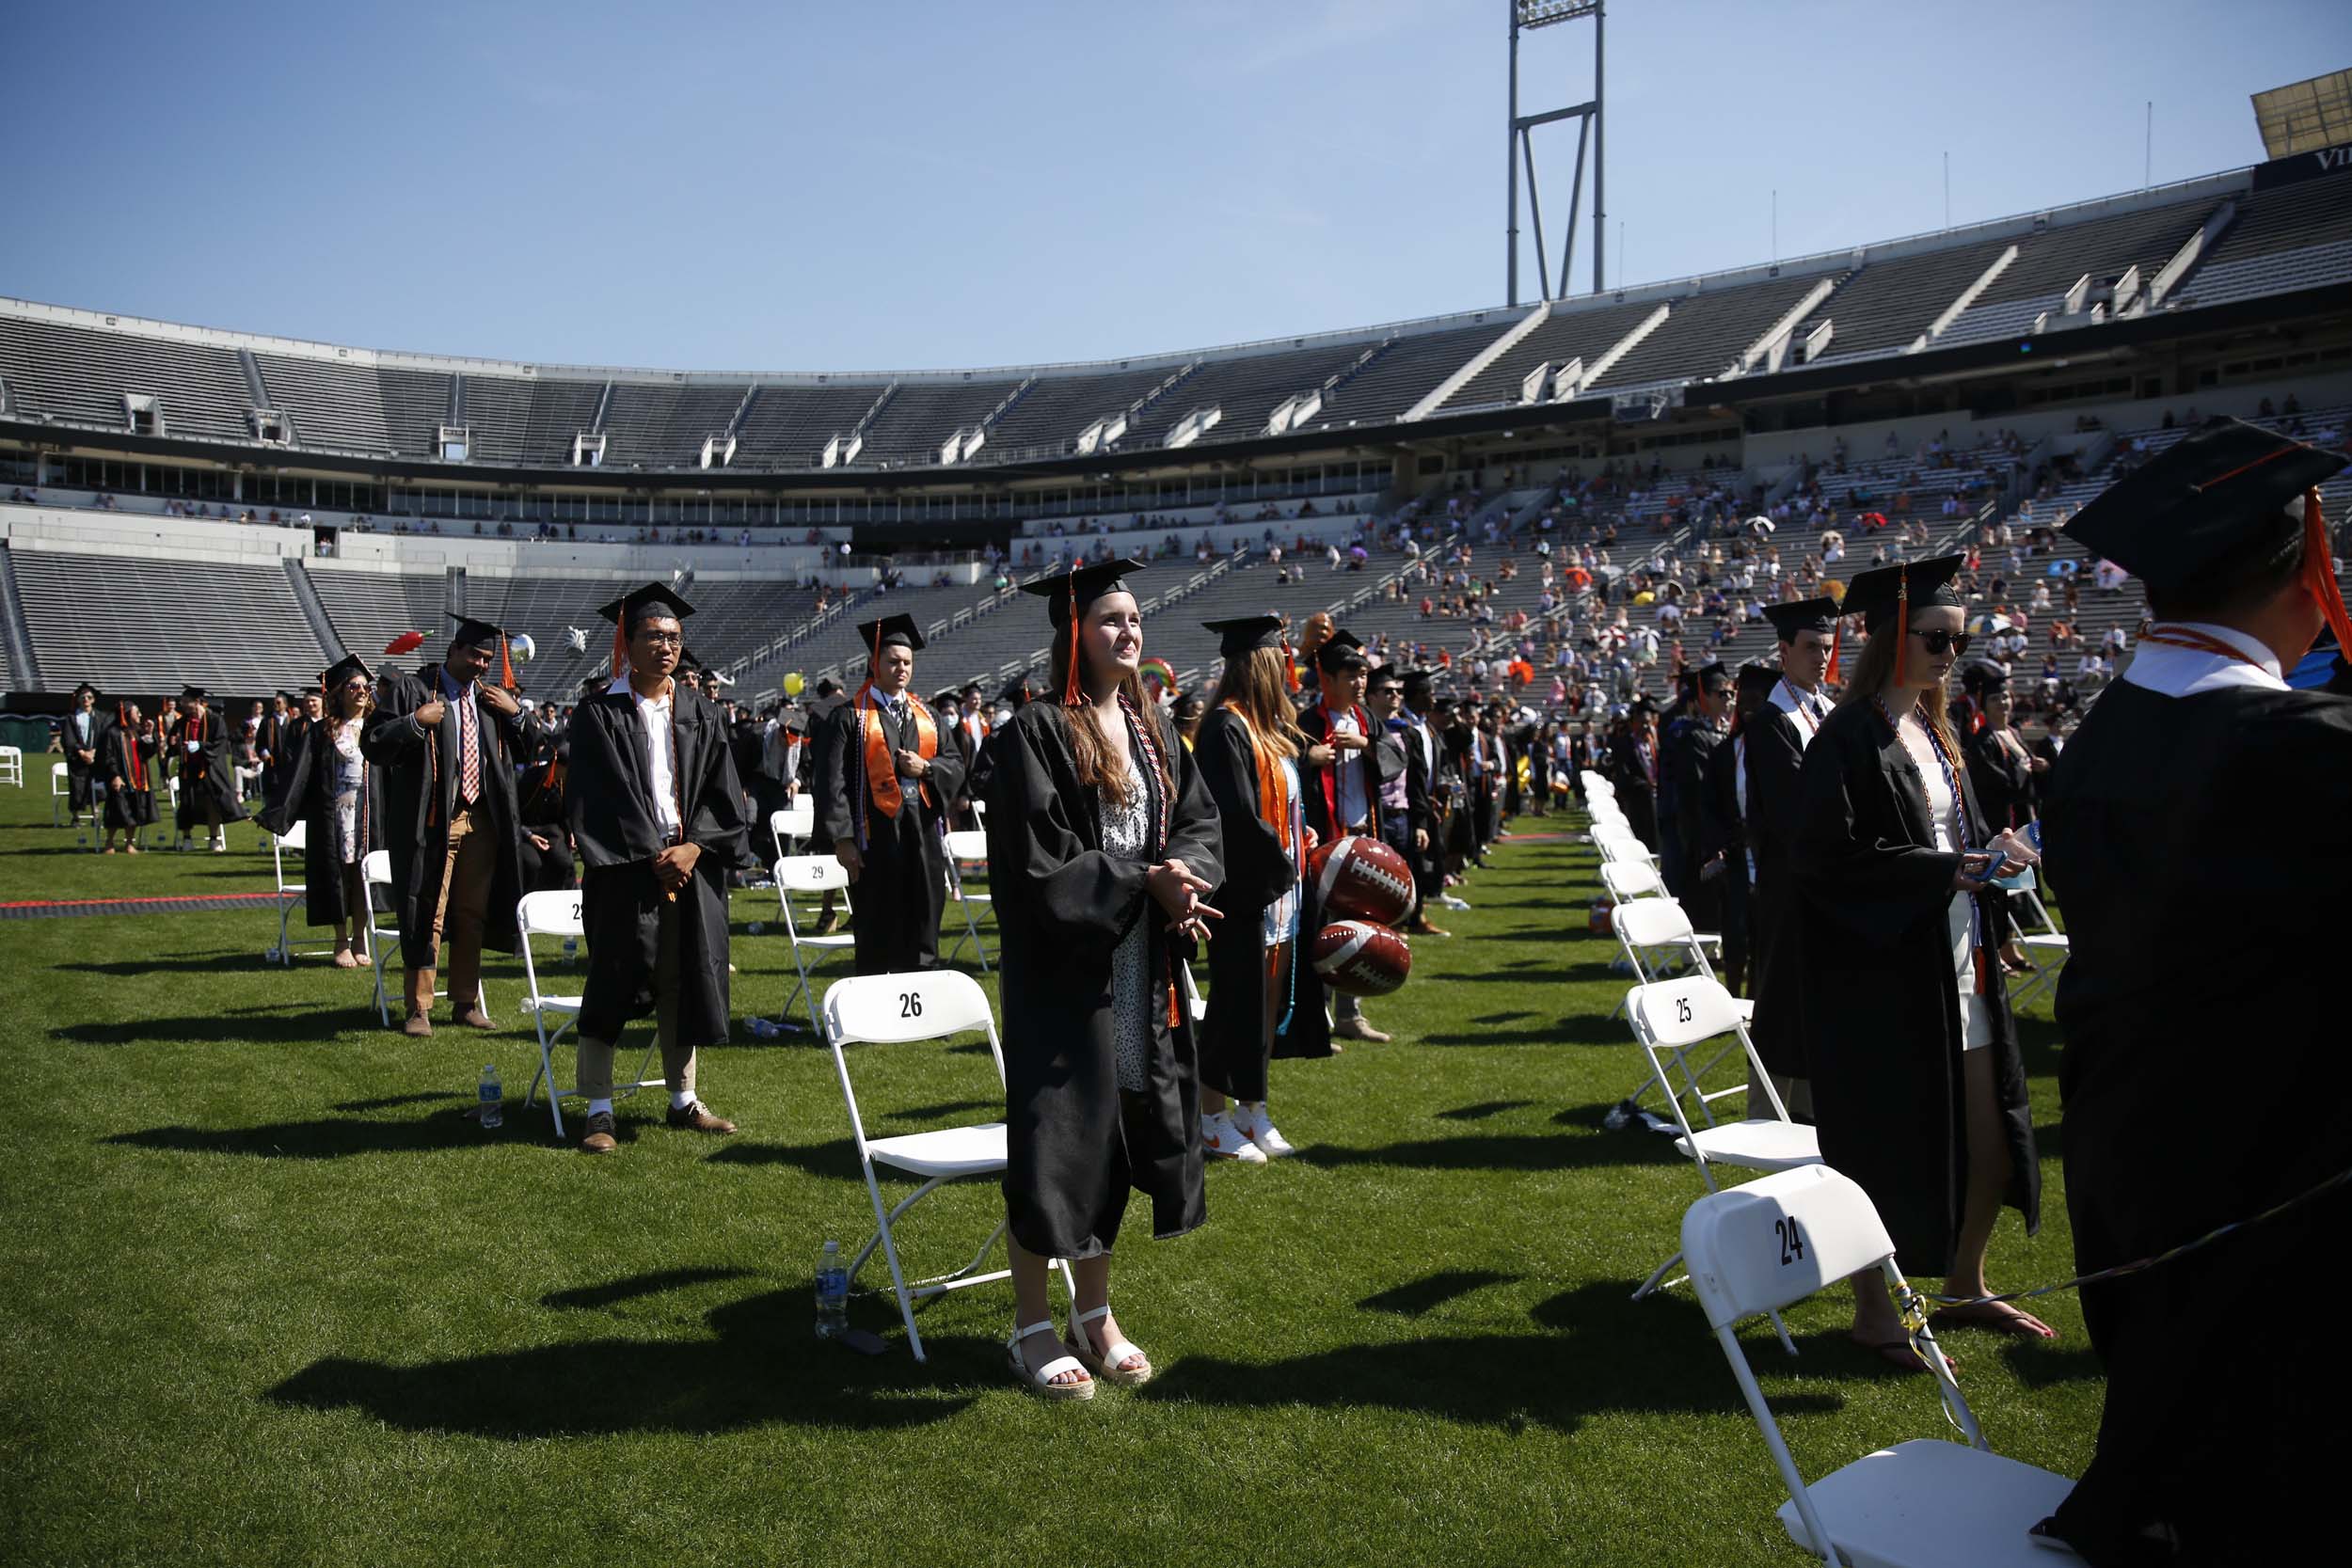 UVA Graduates standing up in front of their socially distanced chairs